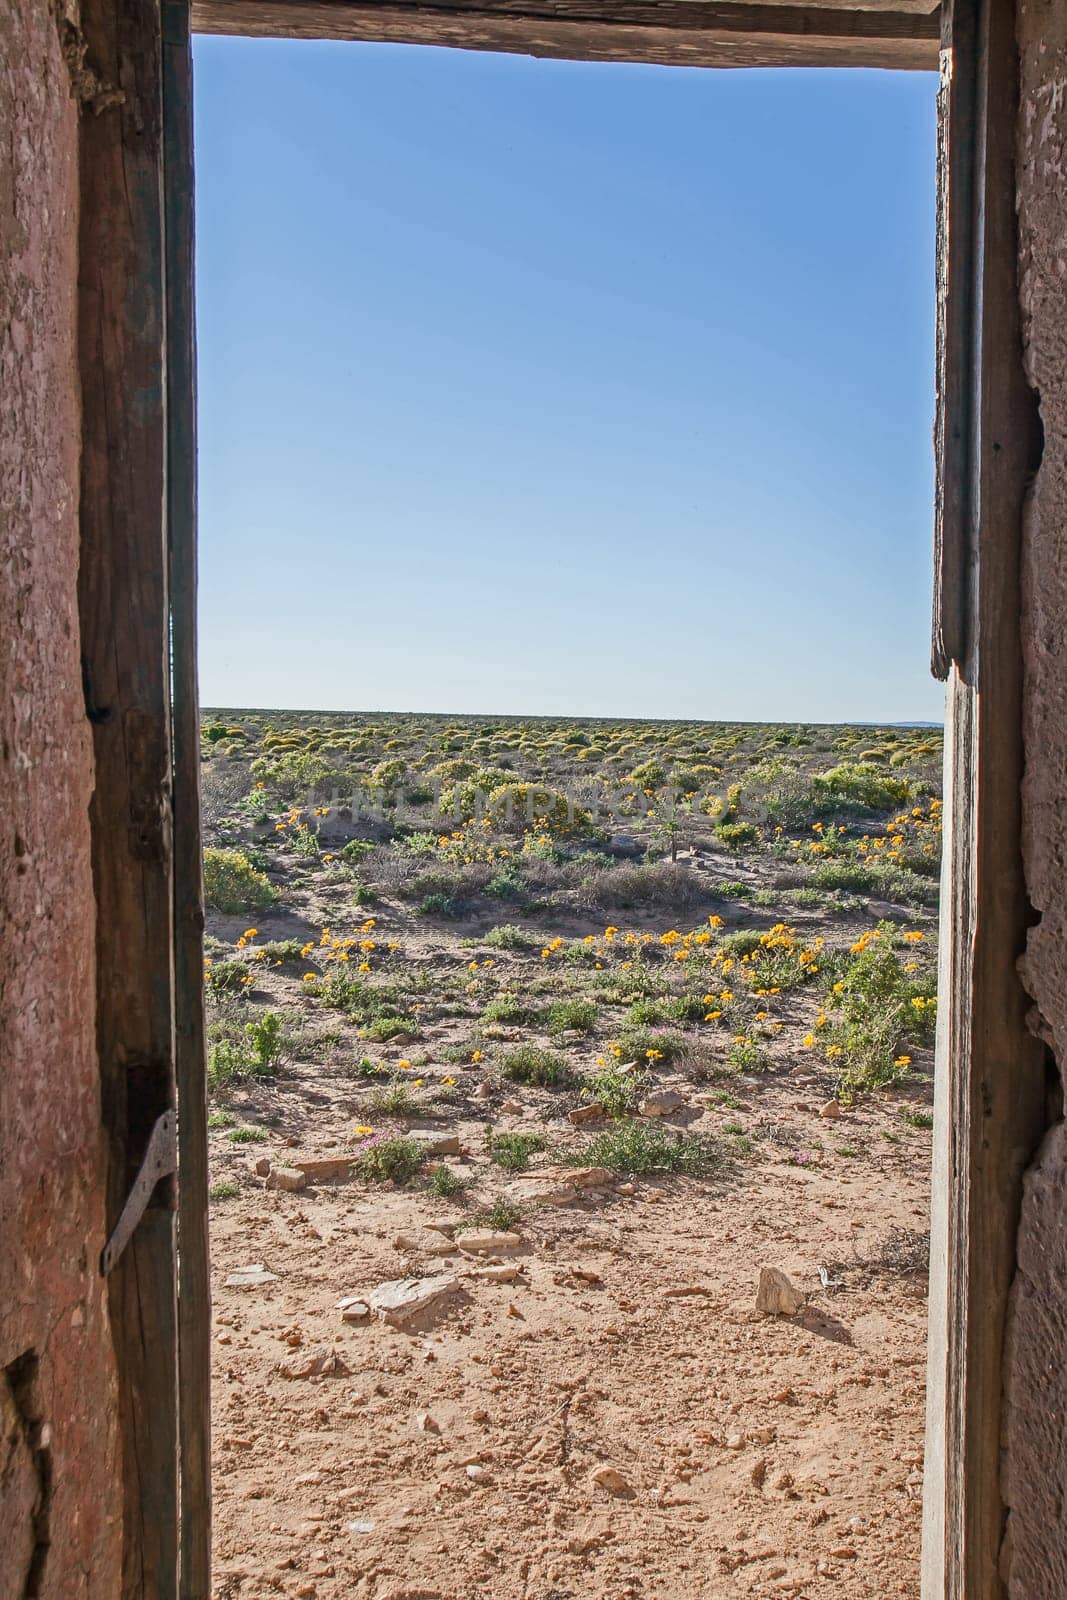 View of the Namaqualand spring flower show from the open doorway of  a ruined Namaqualand house